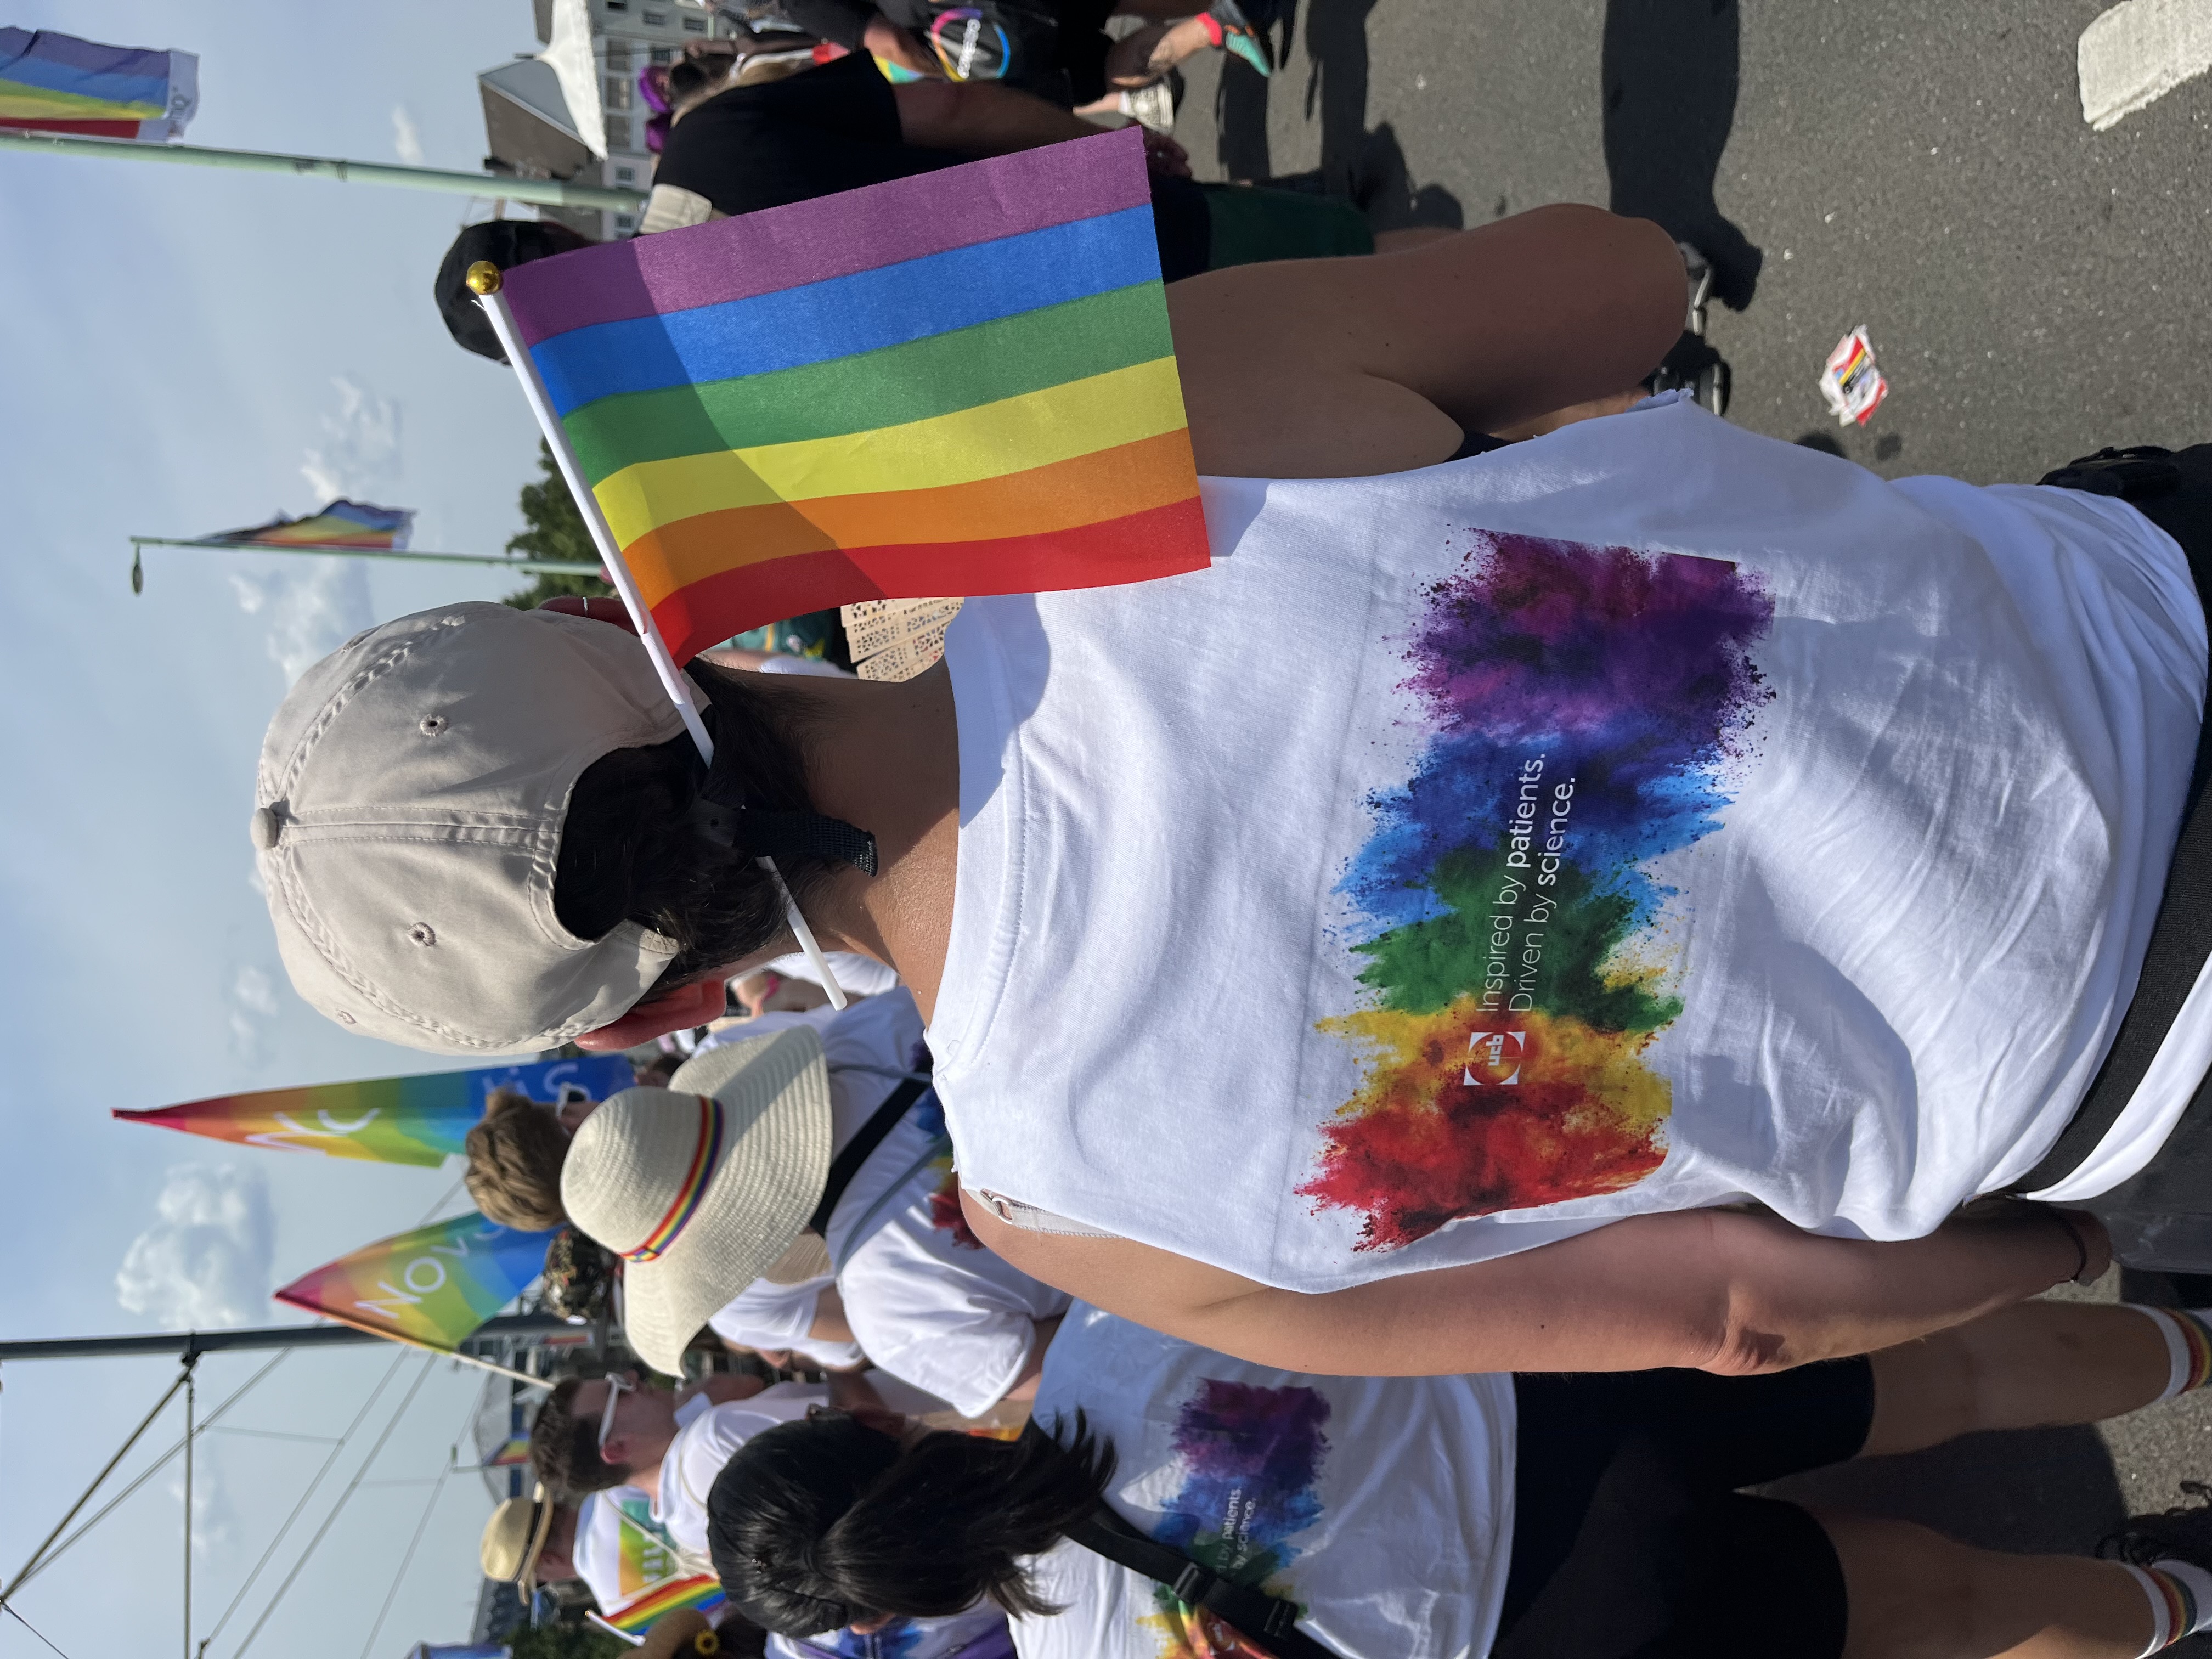 UCB colleague at PrideCologe with colourful UCB tshirt